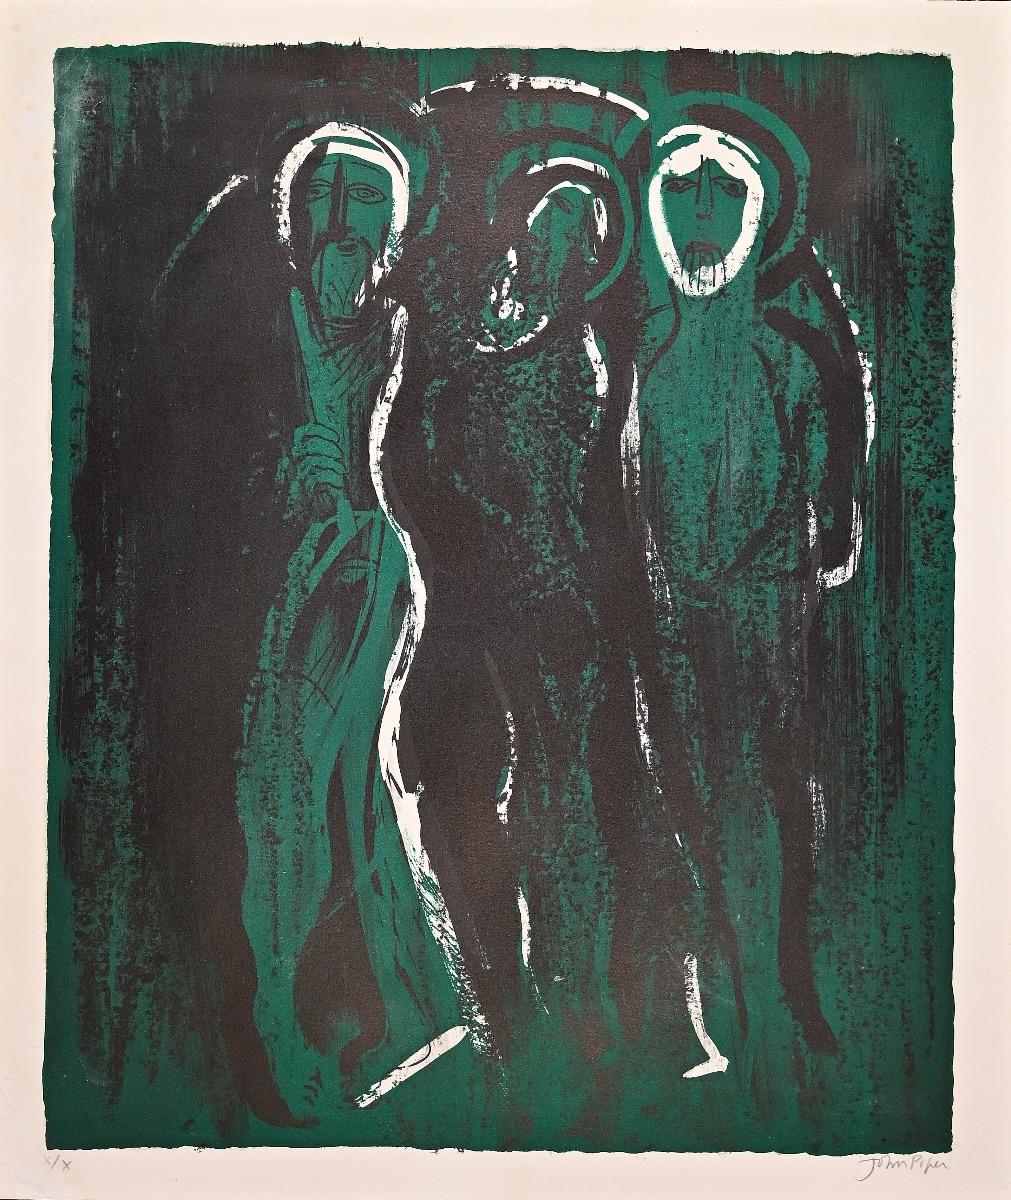 Saints is an original lithograph on paper, realized by John Piper.

The state of preservation of the artwork is good.

Hand-signed on the lower right margin.  Image Dimensions: 57 x 48 cm.

Numbered on the lower left margin. One of the 10 specimens